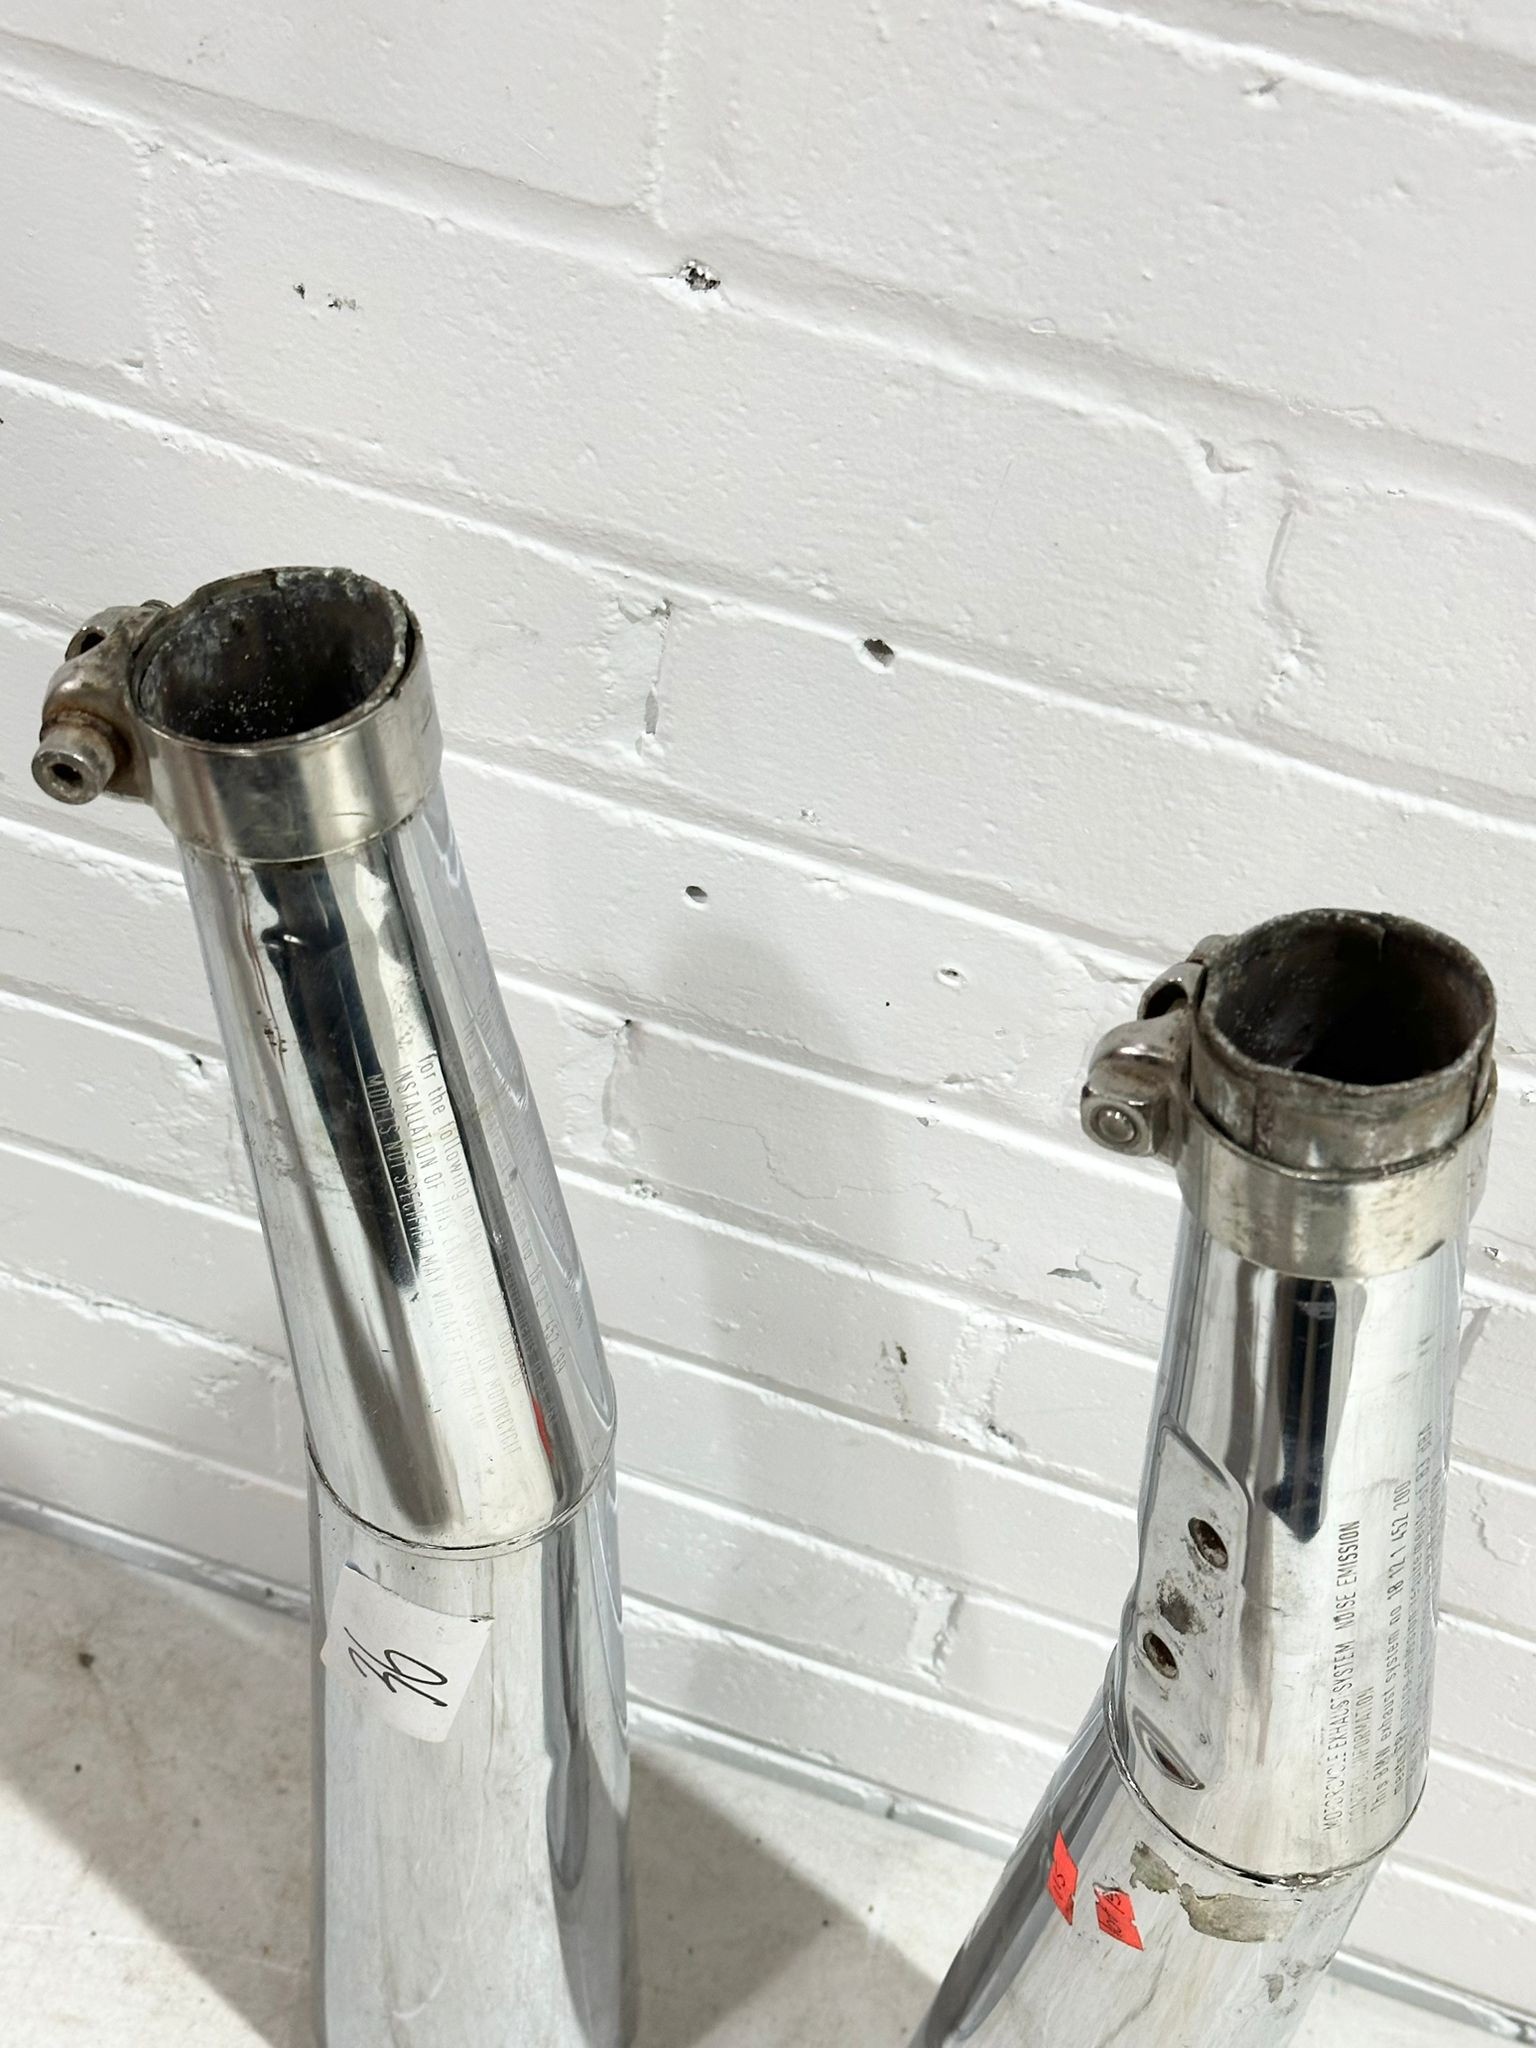 BMW R80 exhausts, stainless steel - Image 5 of 5